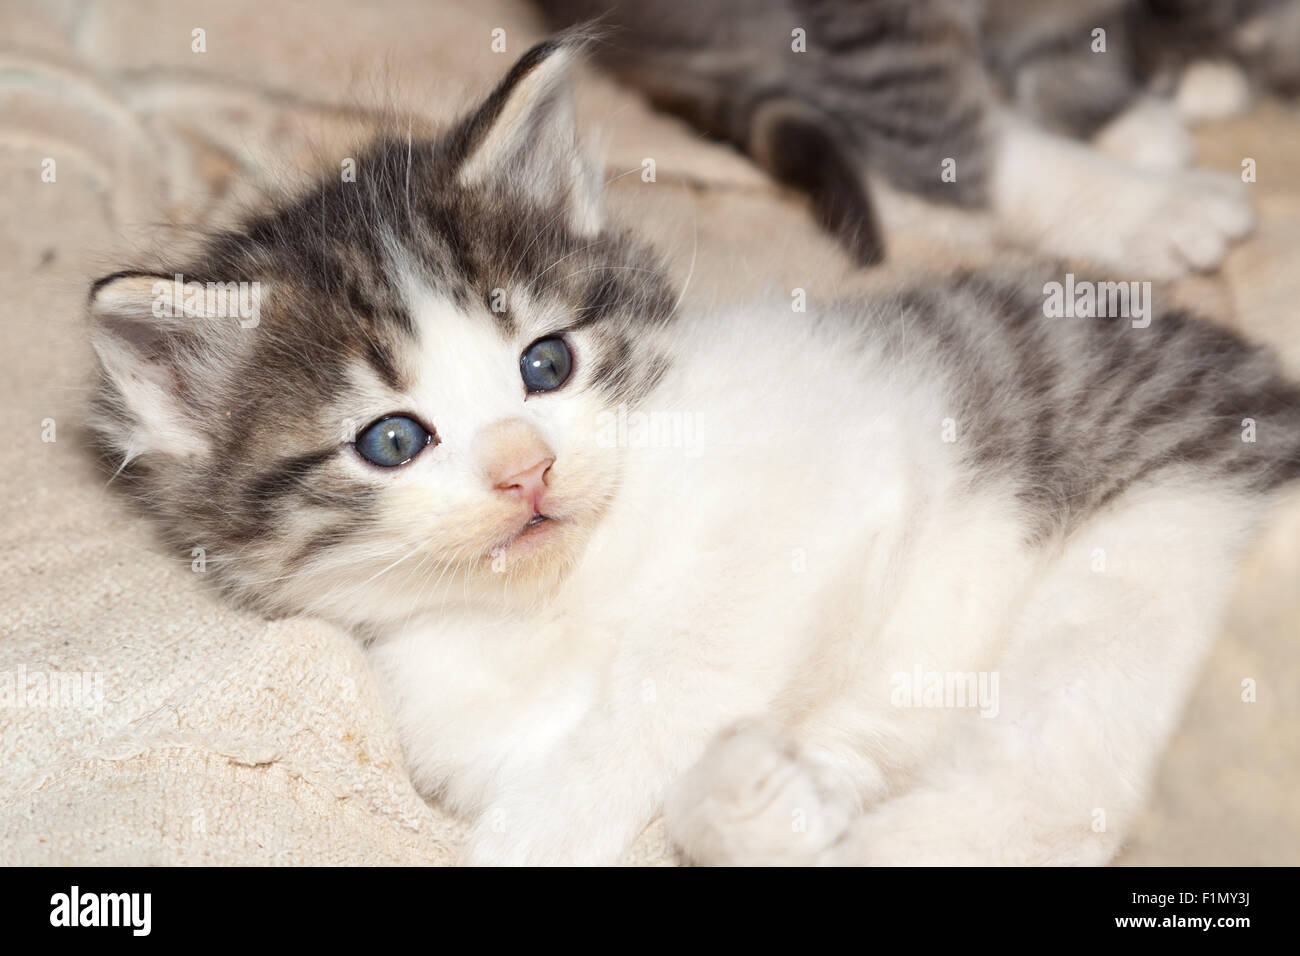 A cute feral kitten with blue eyes laying on a dirty towel. Stock Photo